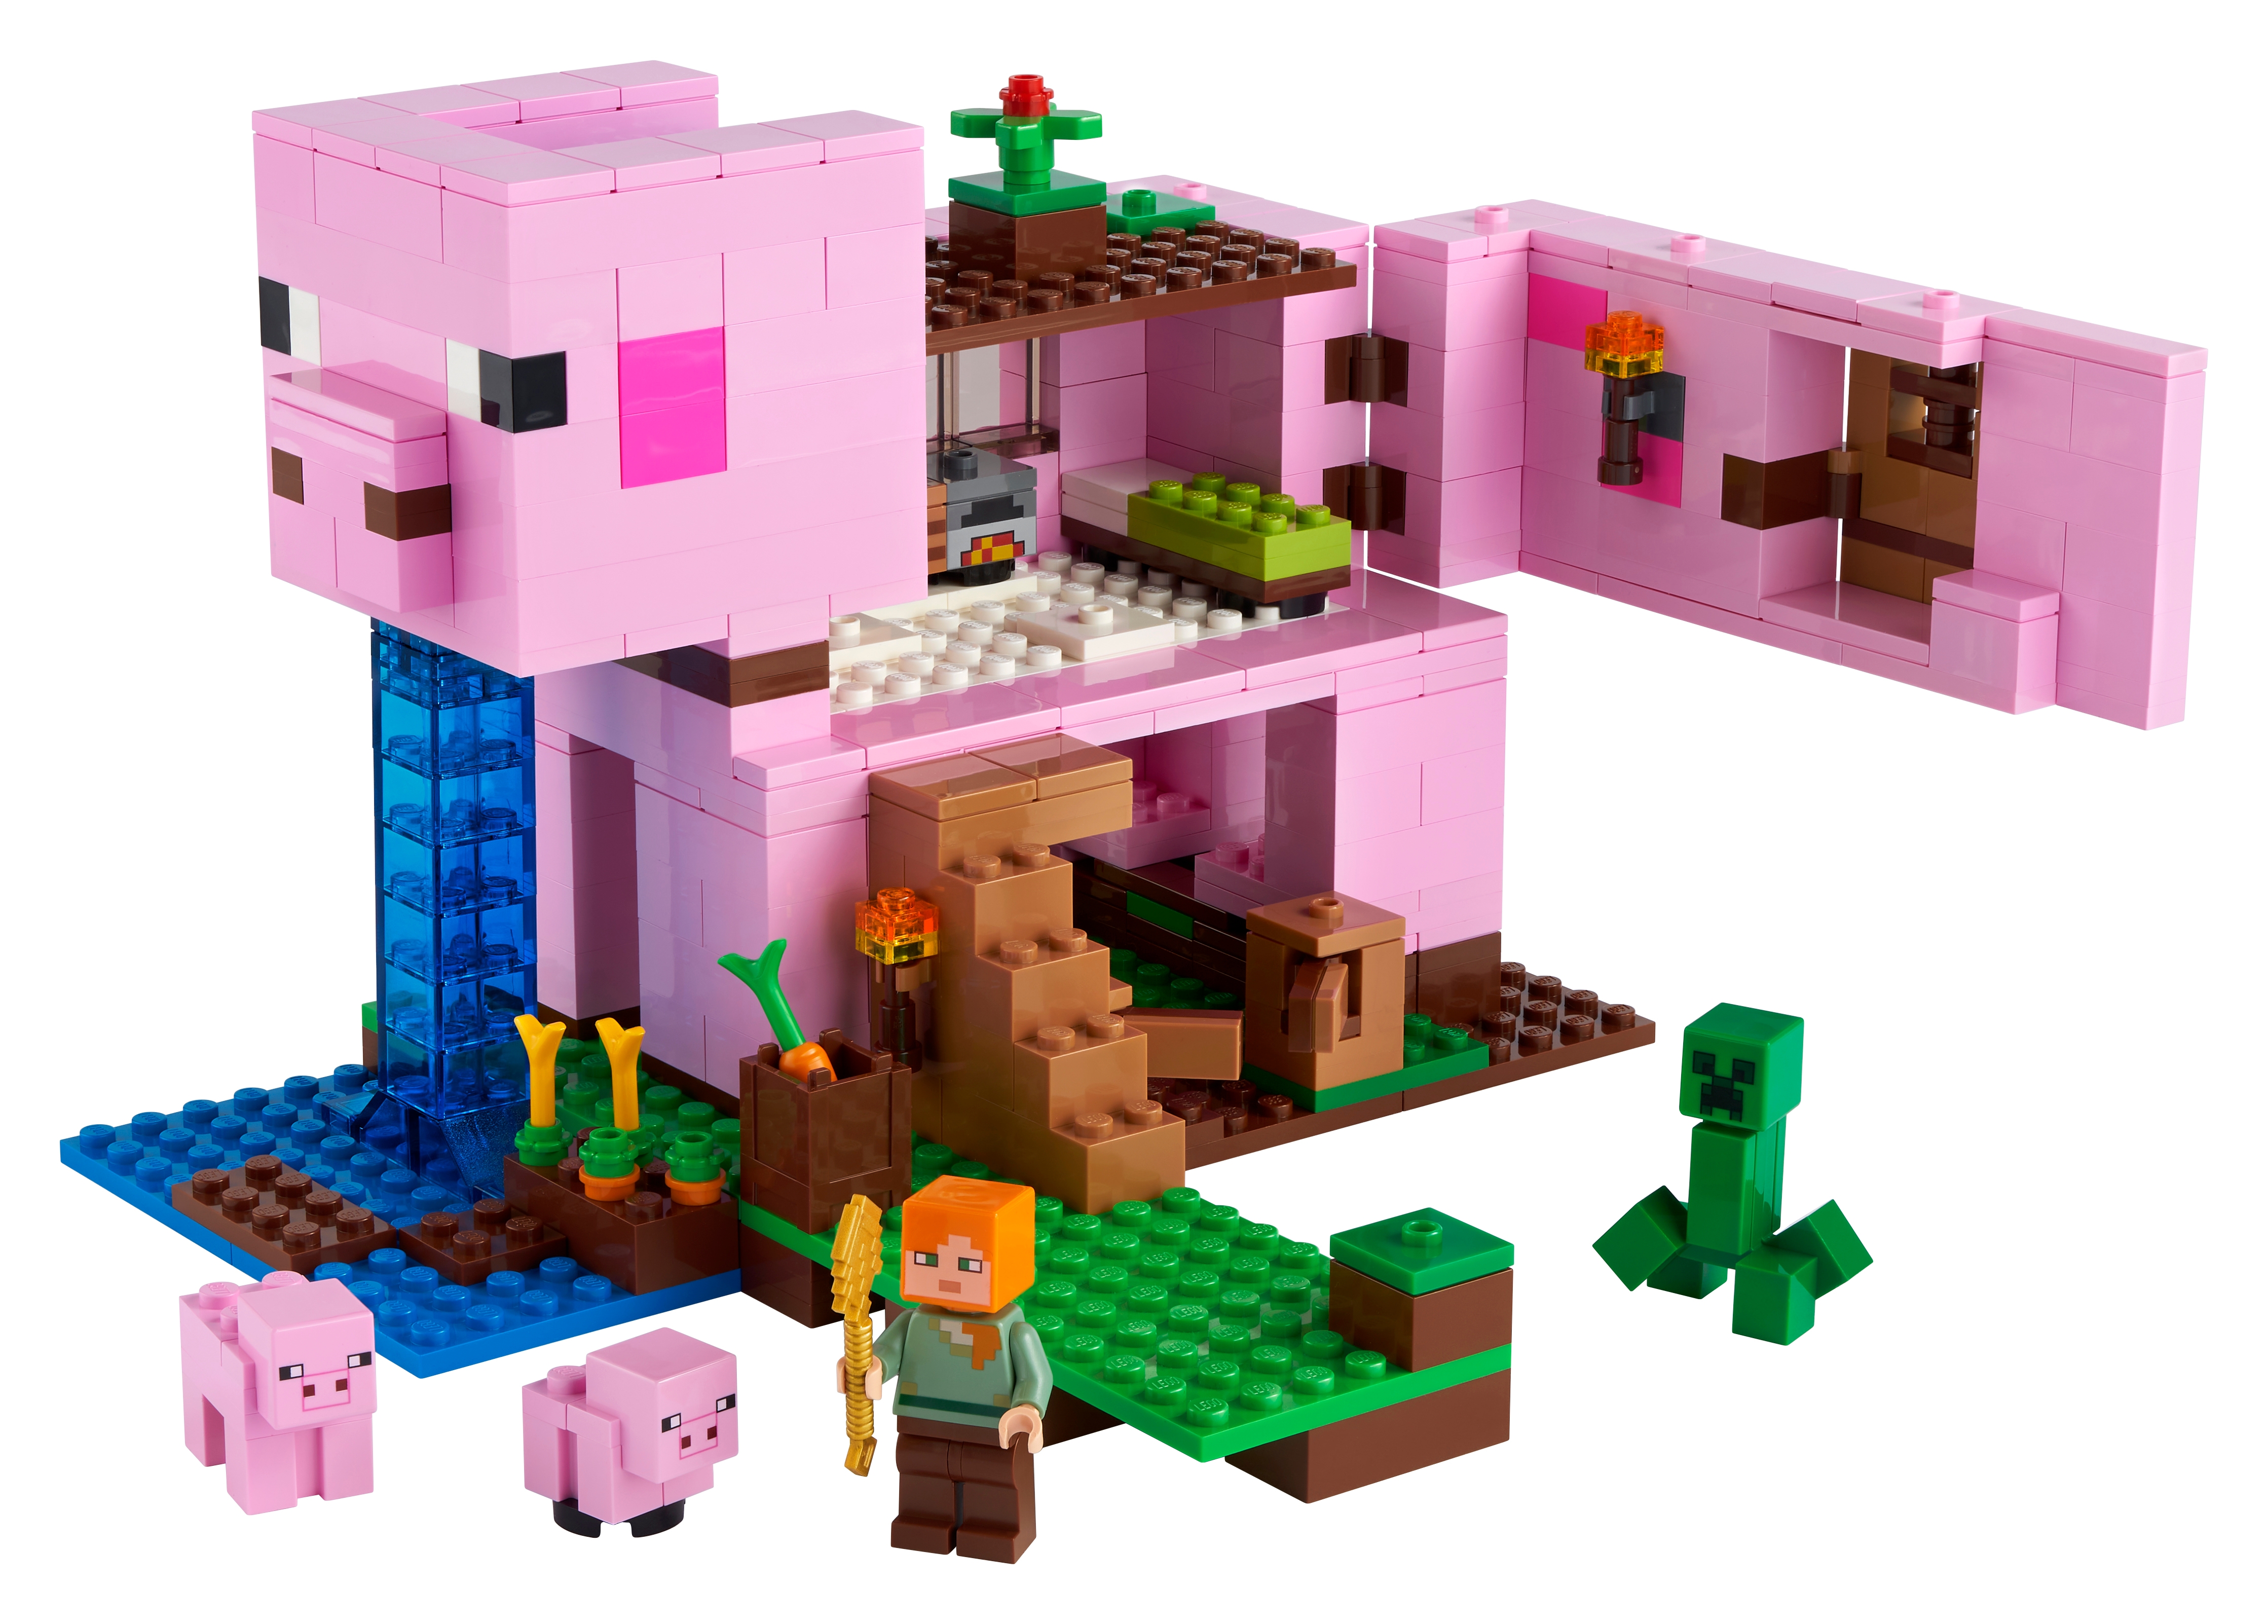 The Pig House 21170 | Minecraft® | online at the Official CA